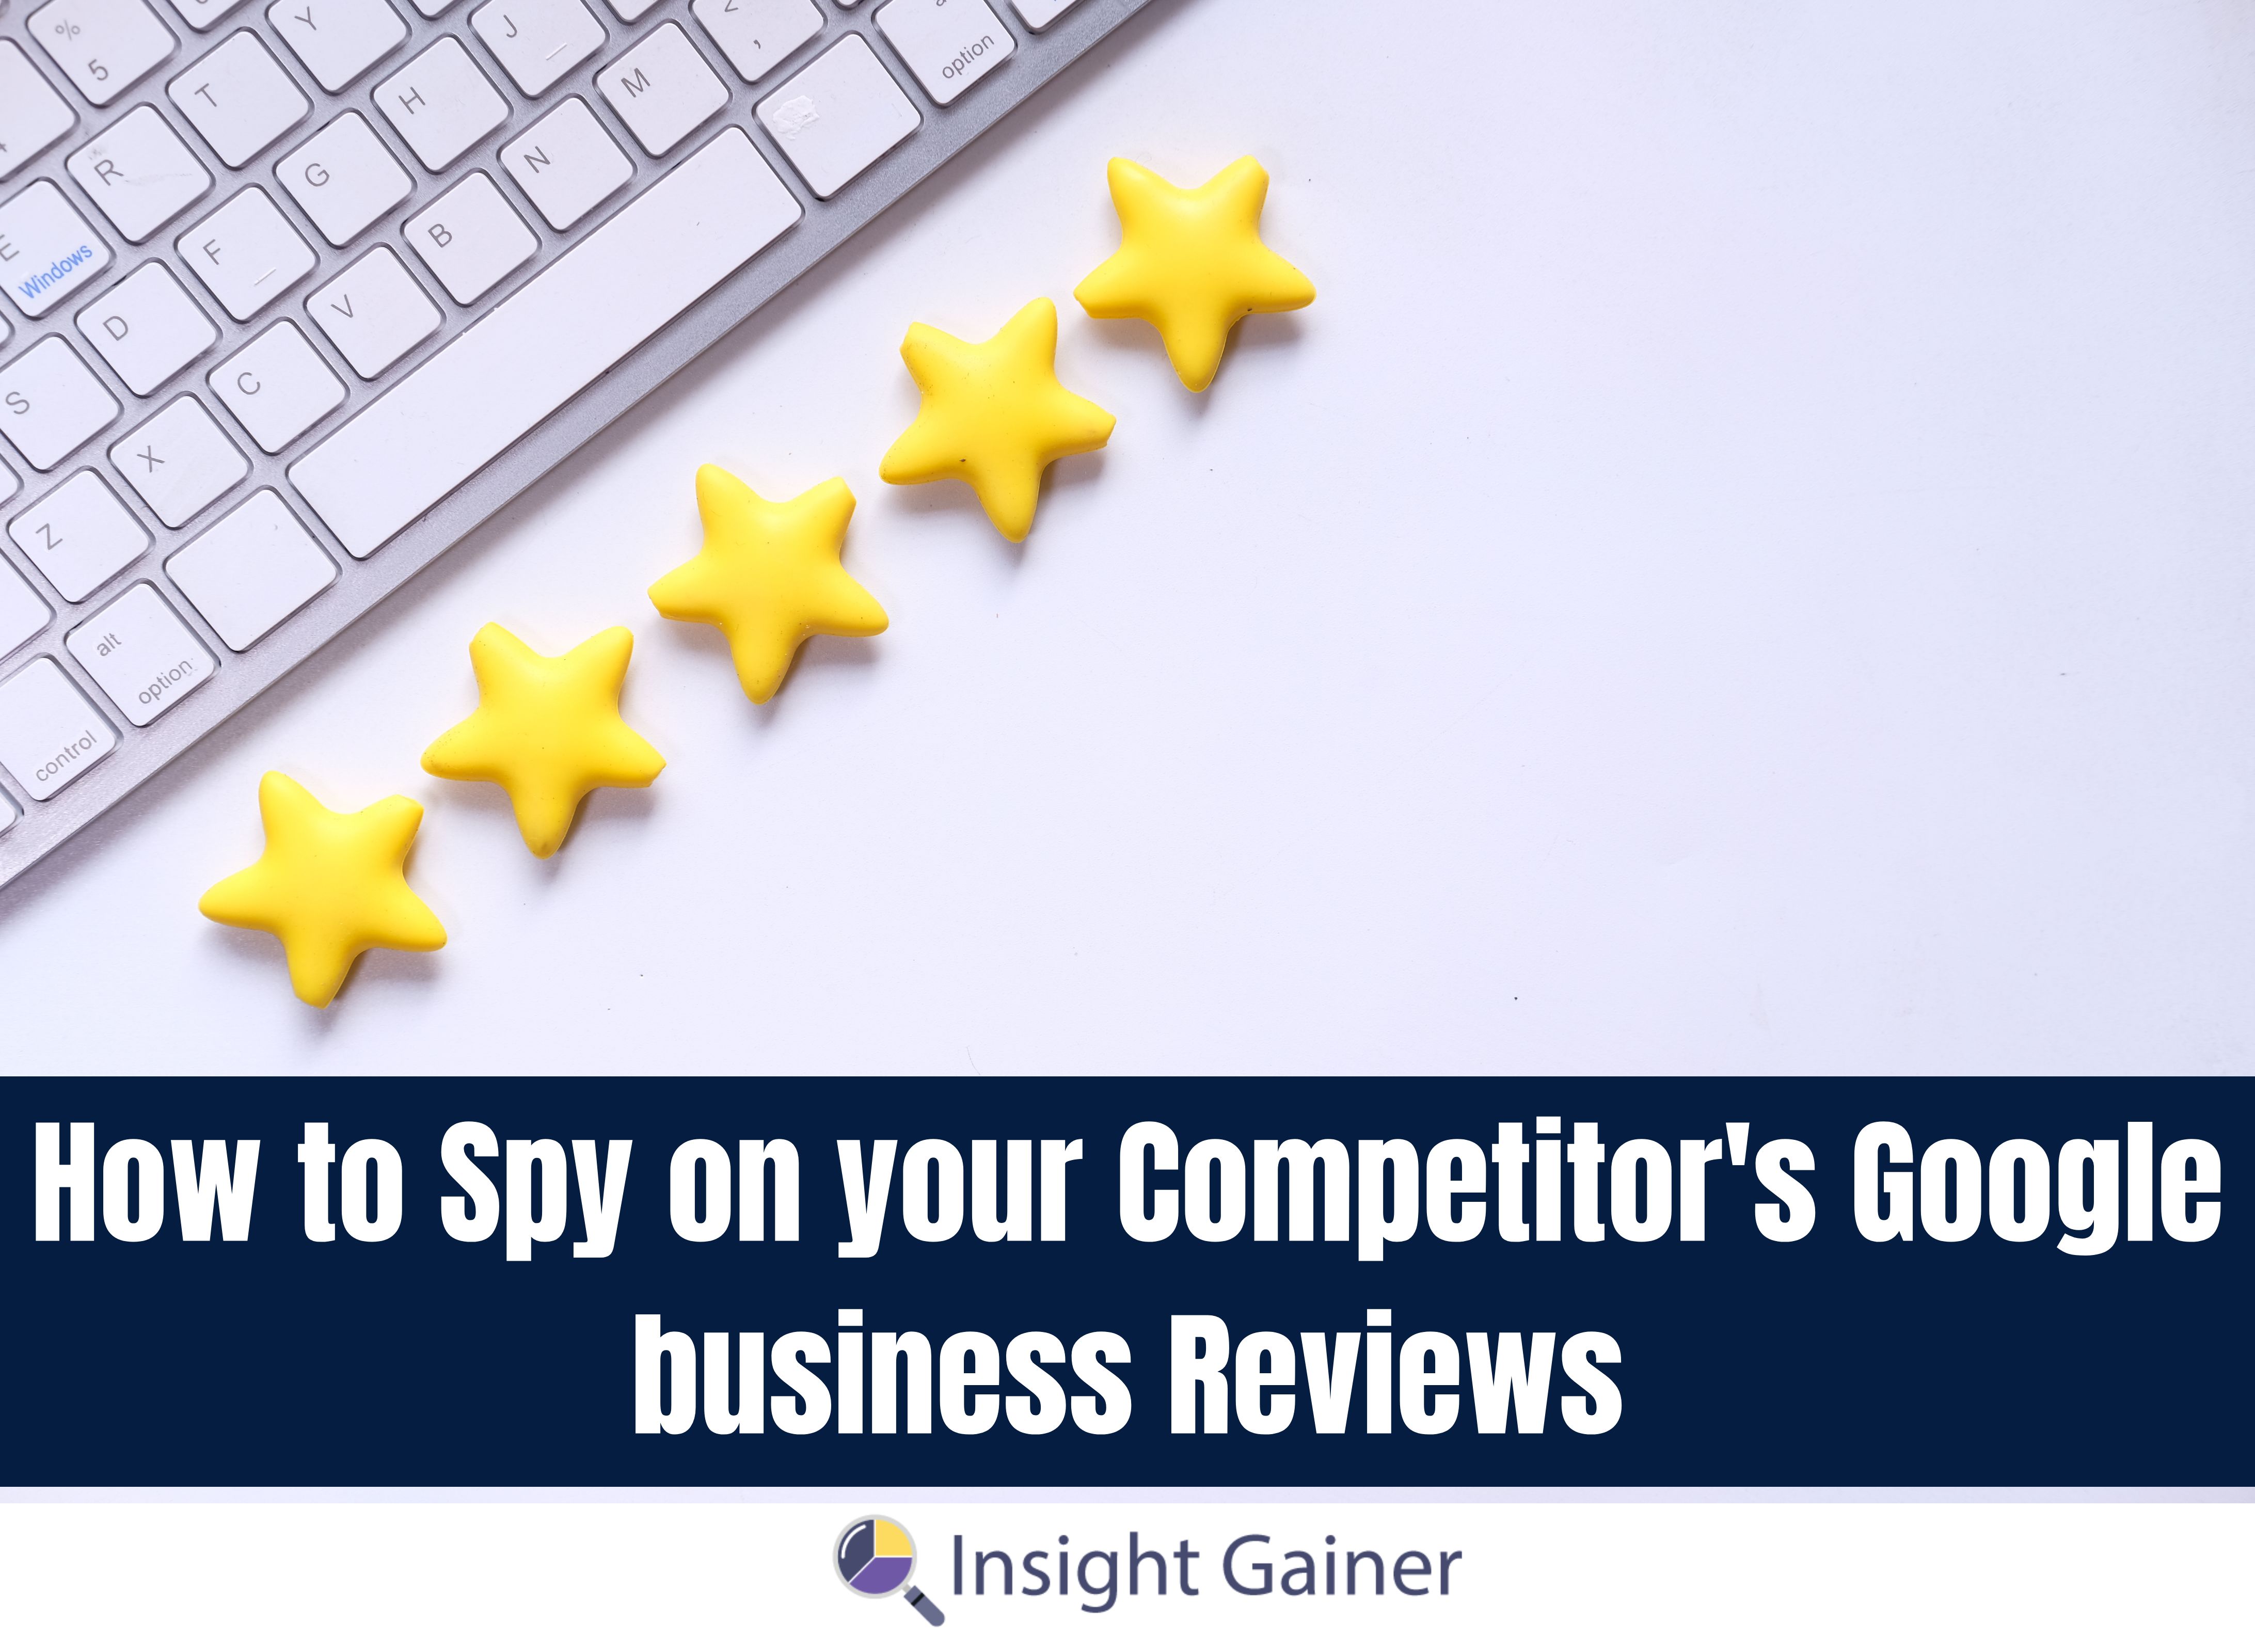 How to Spy on your Competitor’s Google business Reviews